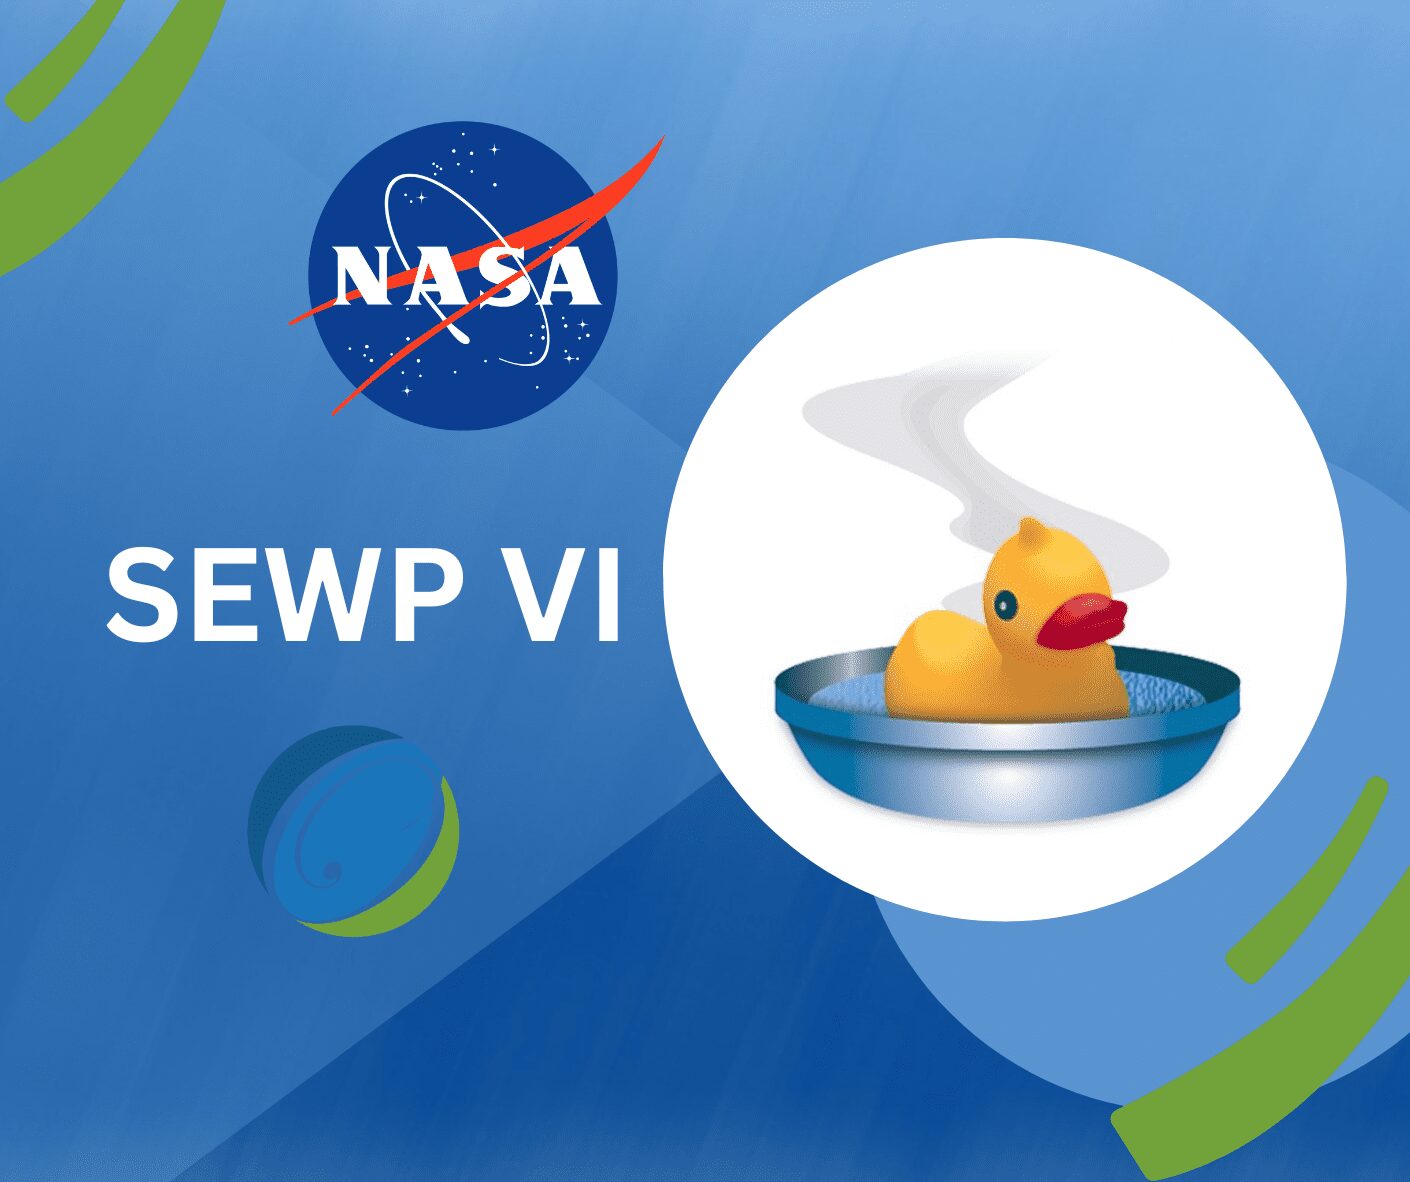 SEWP VI Contract Update